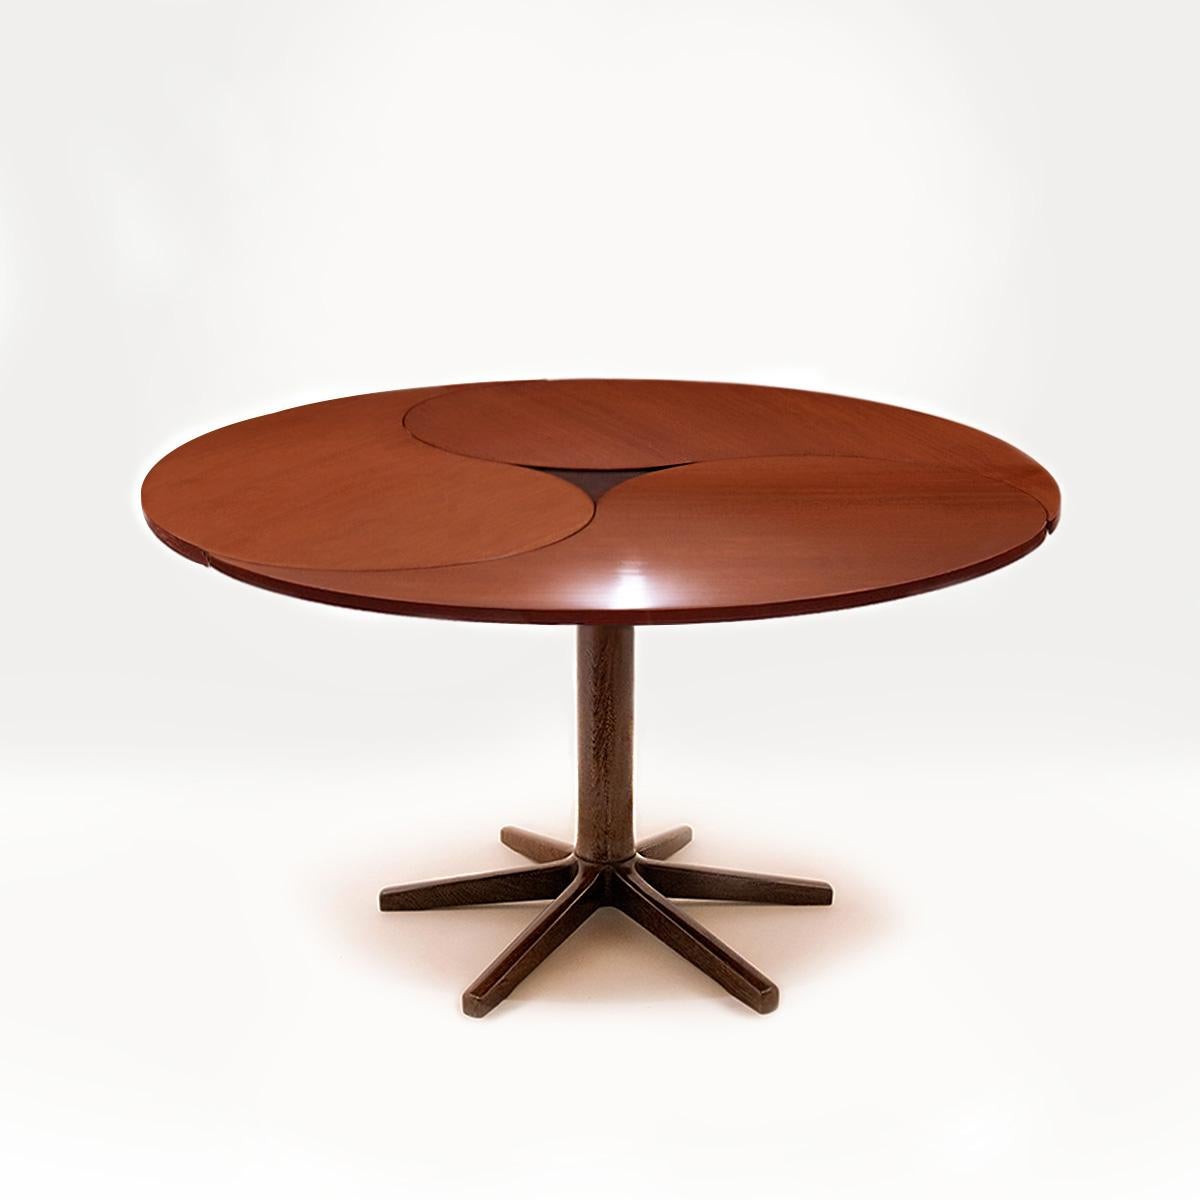 An extraordinary Danish Mid Century vintage teak and wenge Model 550 space saving dining table designed by Ole Gjerløv-Knudsen and Torben Lind for France & Son.

This design takes its name from the pivoting and rotating comma shaped leaves that